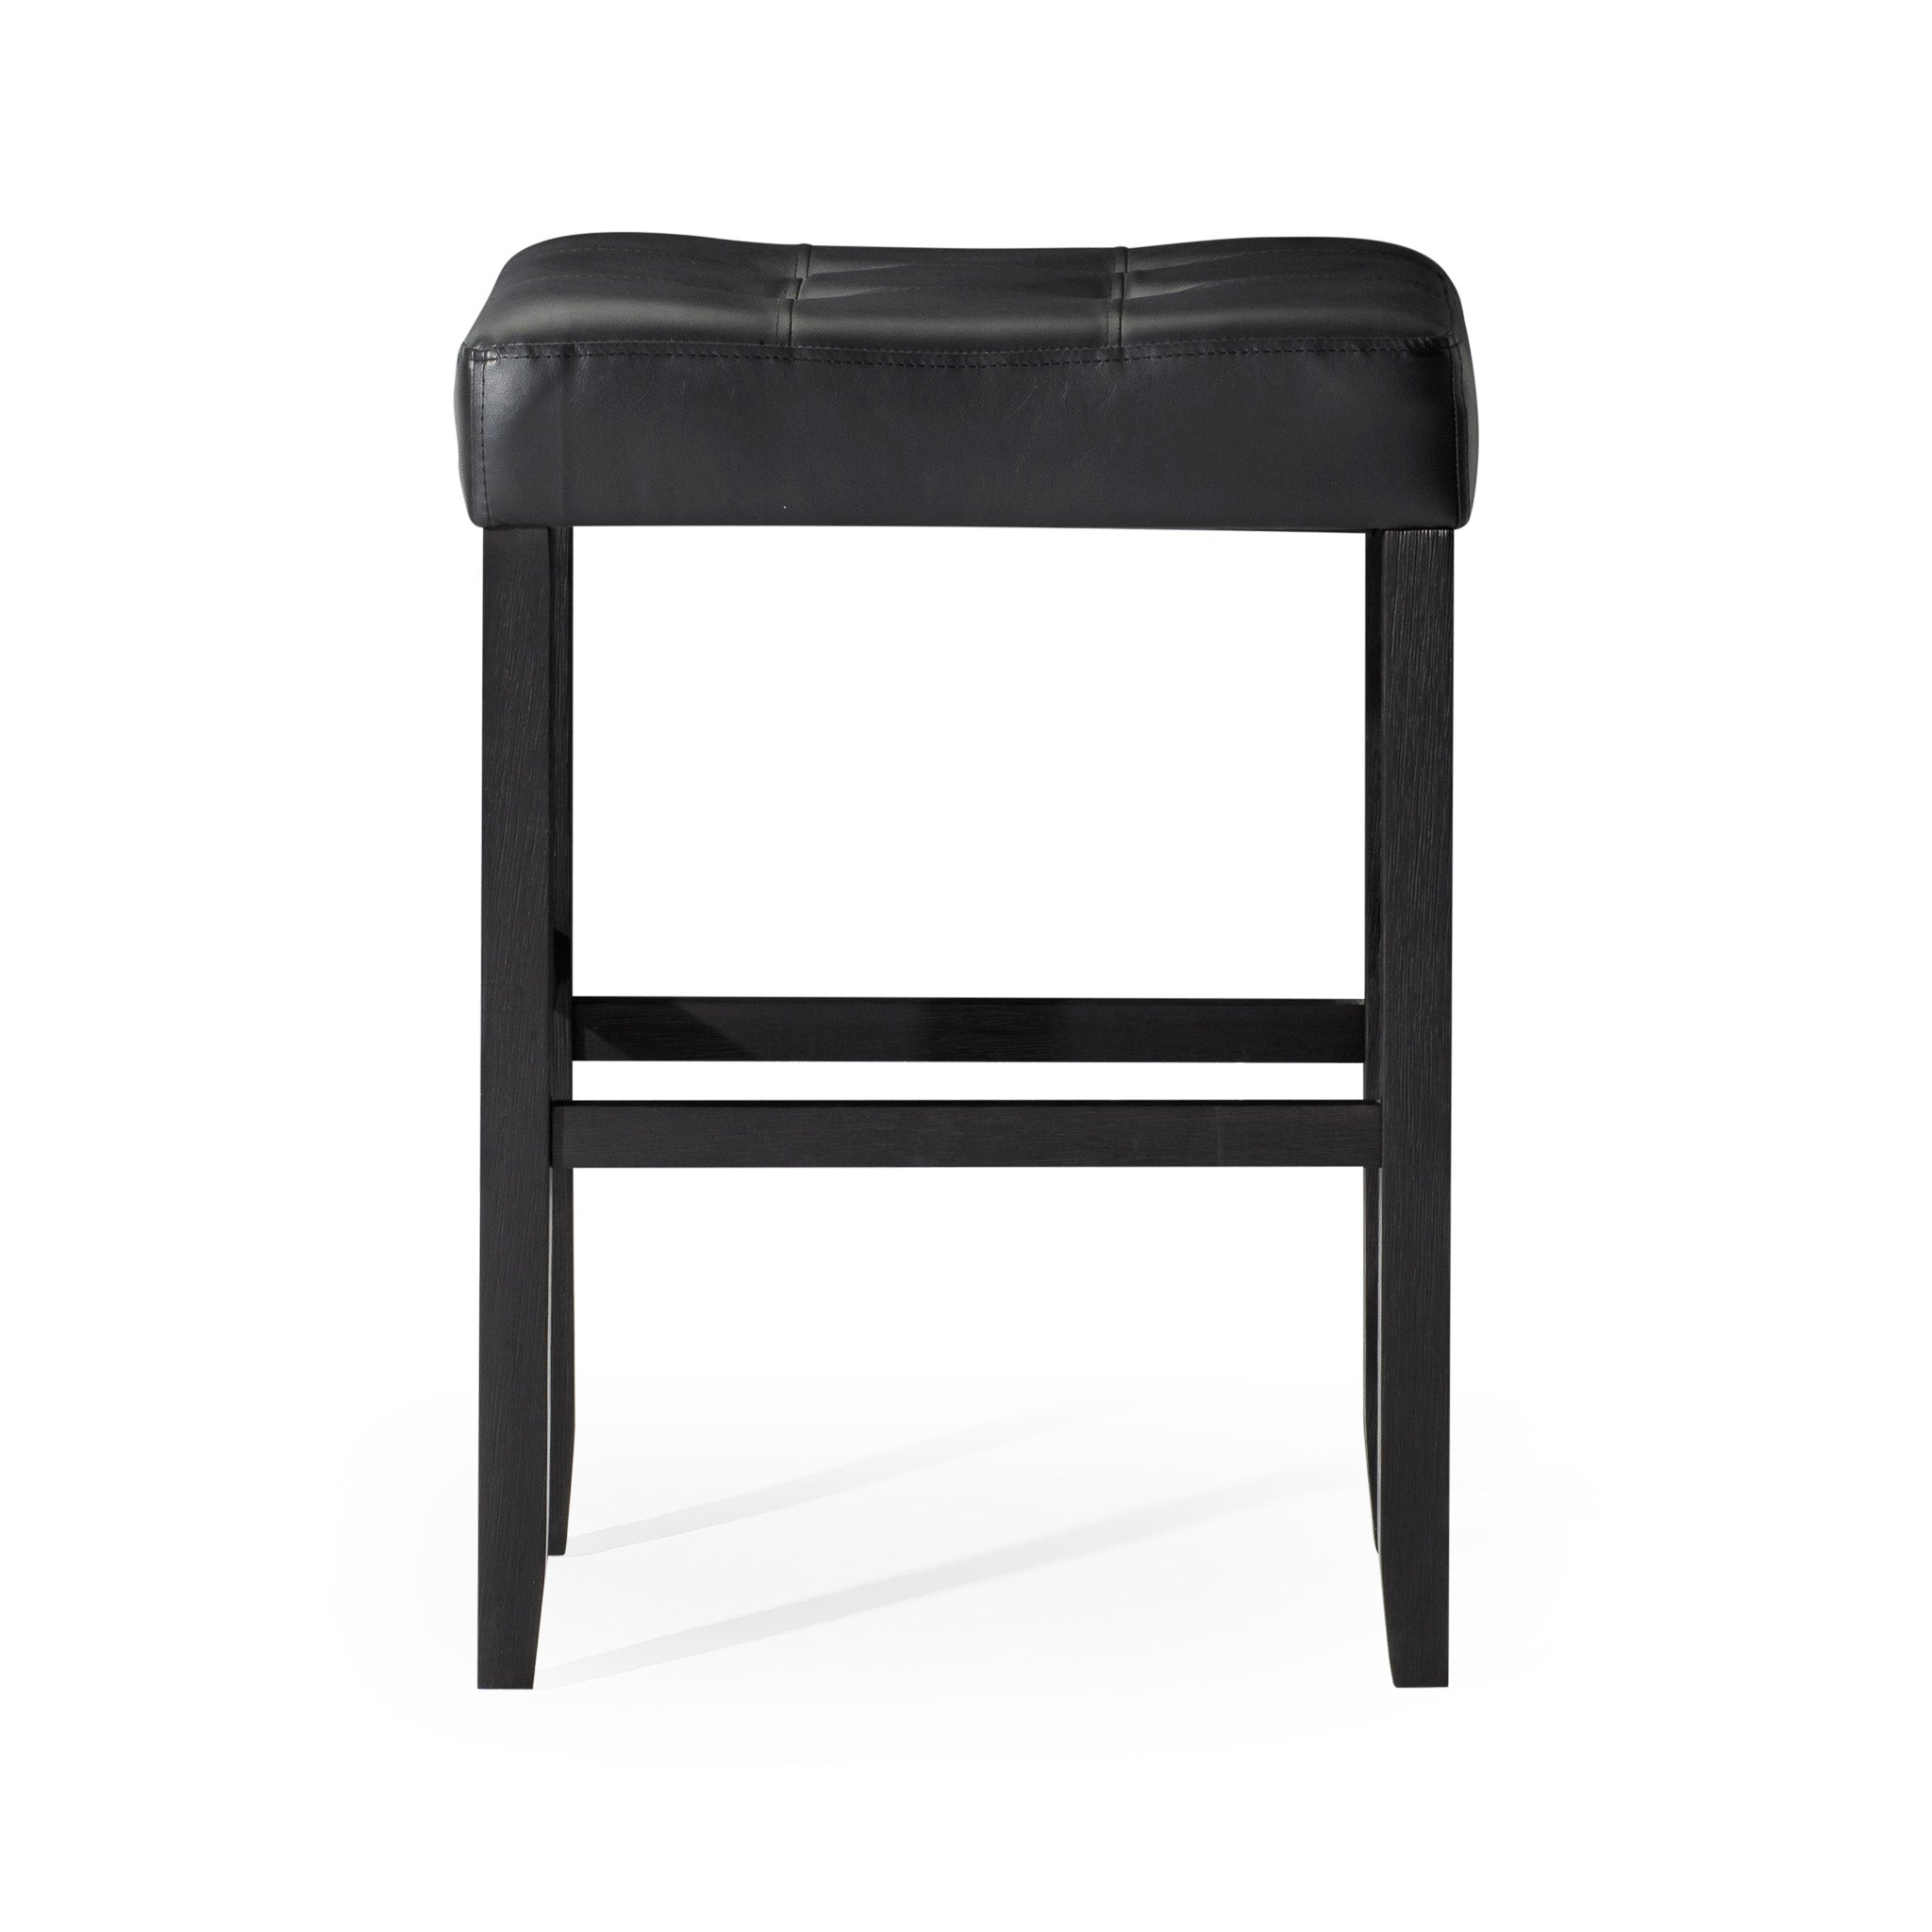 Harper Bar Stool in Rustic Black Wood Finish with Distressed Black Vegan Leather, Set of 2 in Stools by Maven Lane